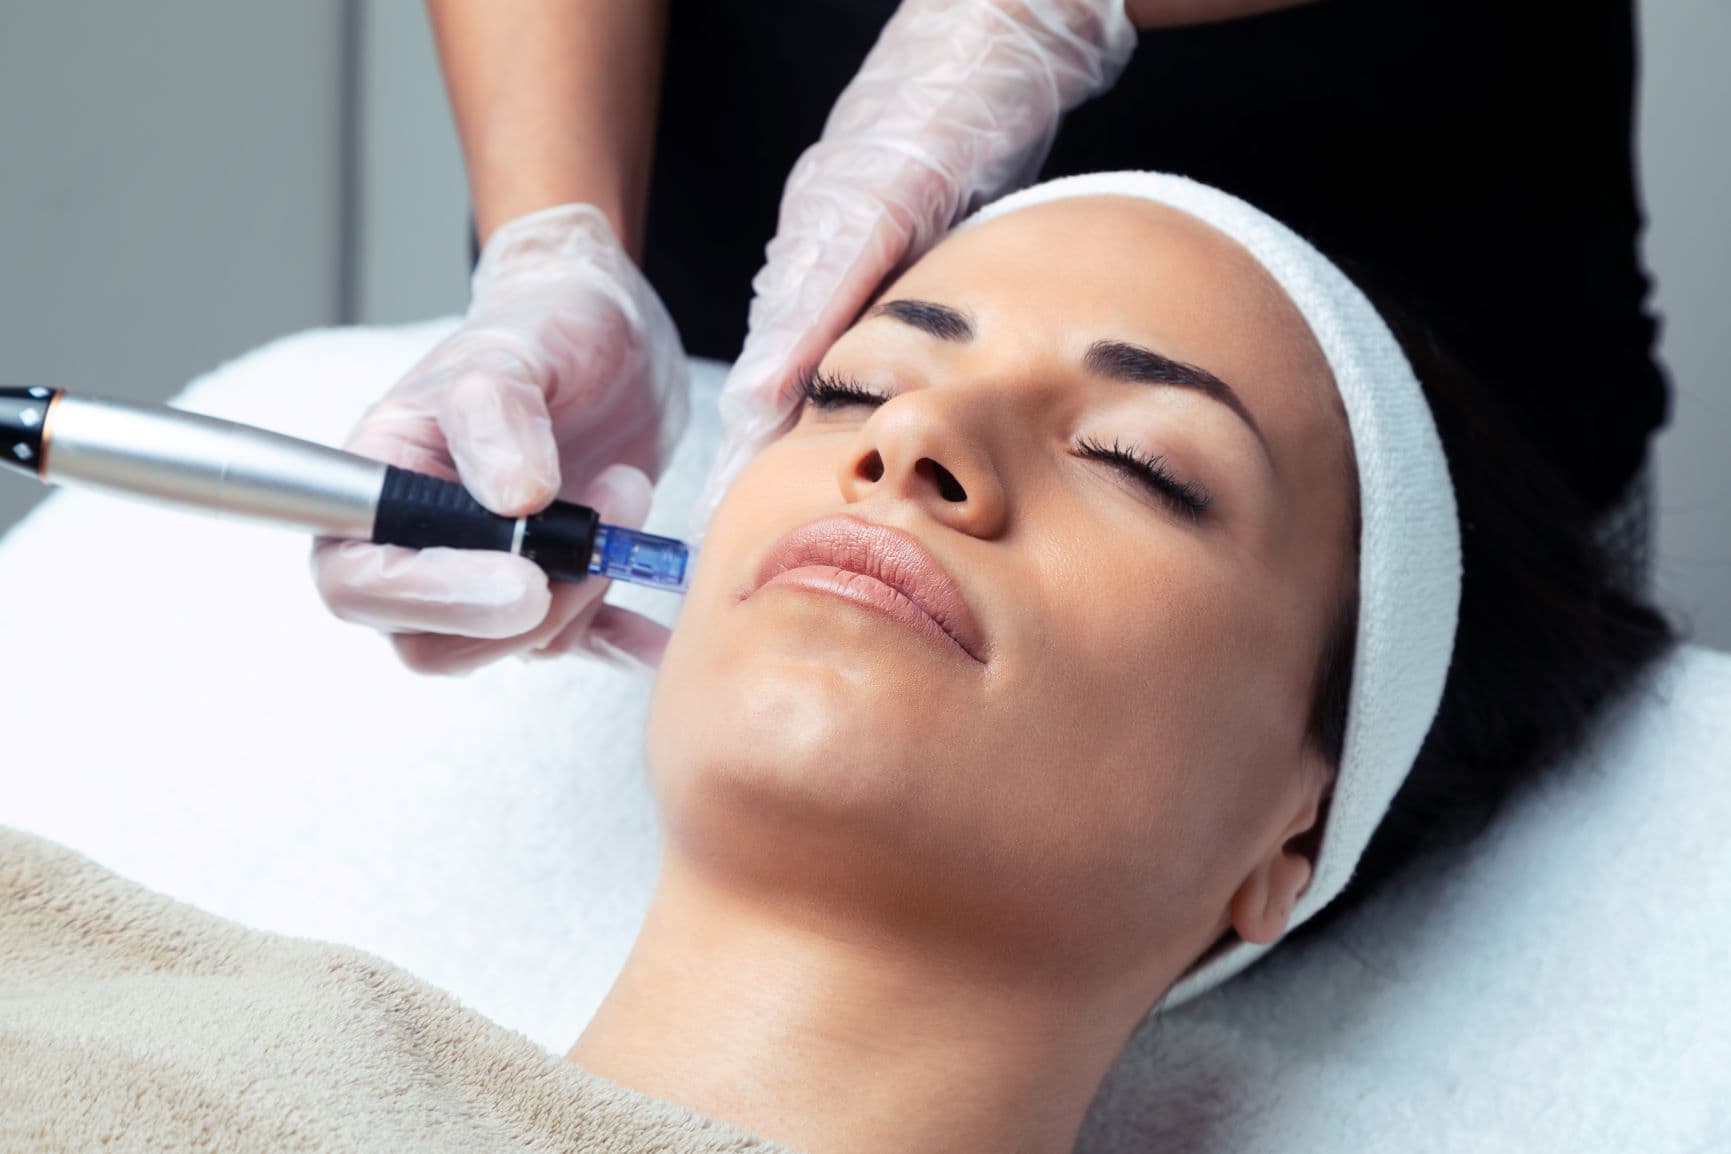 What Is a Vampire Facial? What You Need to Know About Microneedling With PRP (Platelet Rich Plasma)